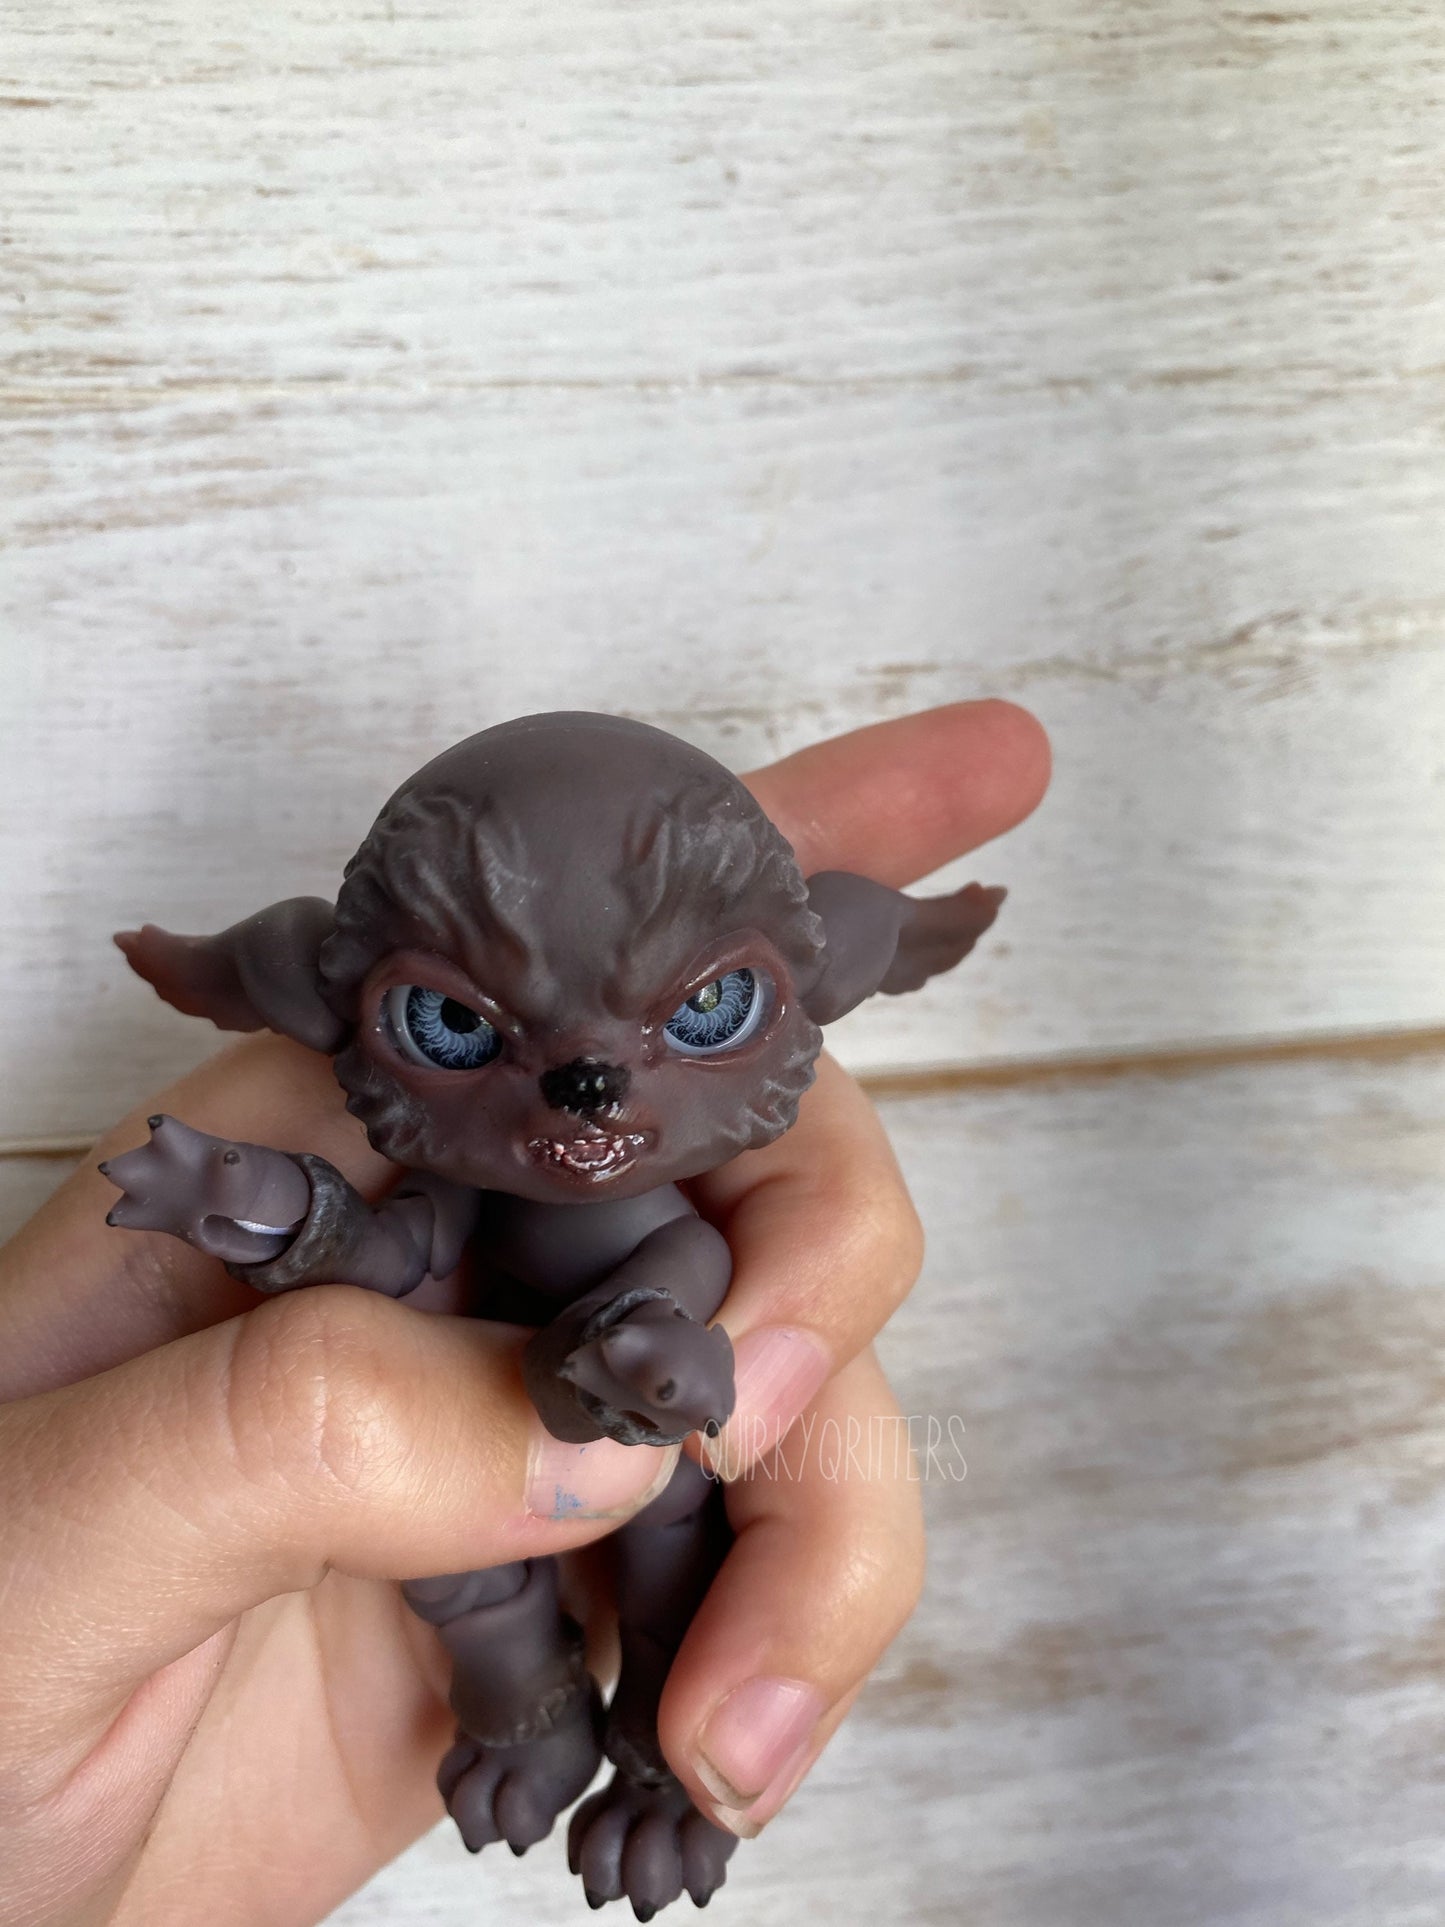 Werewolf! :The Tiny Wolfy Ball Jointed Doll